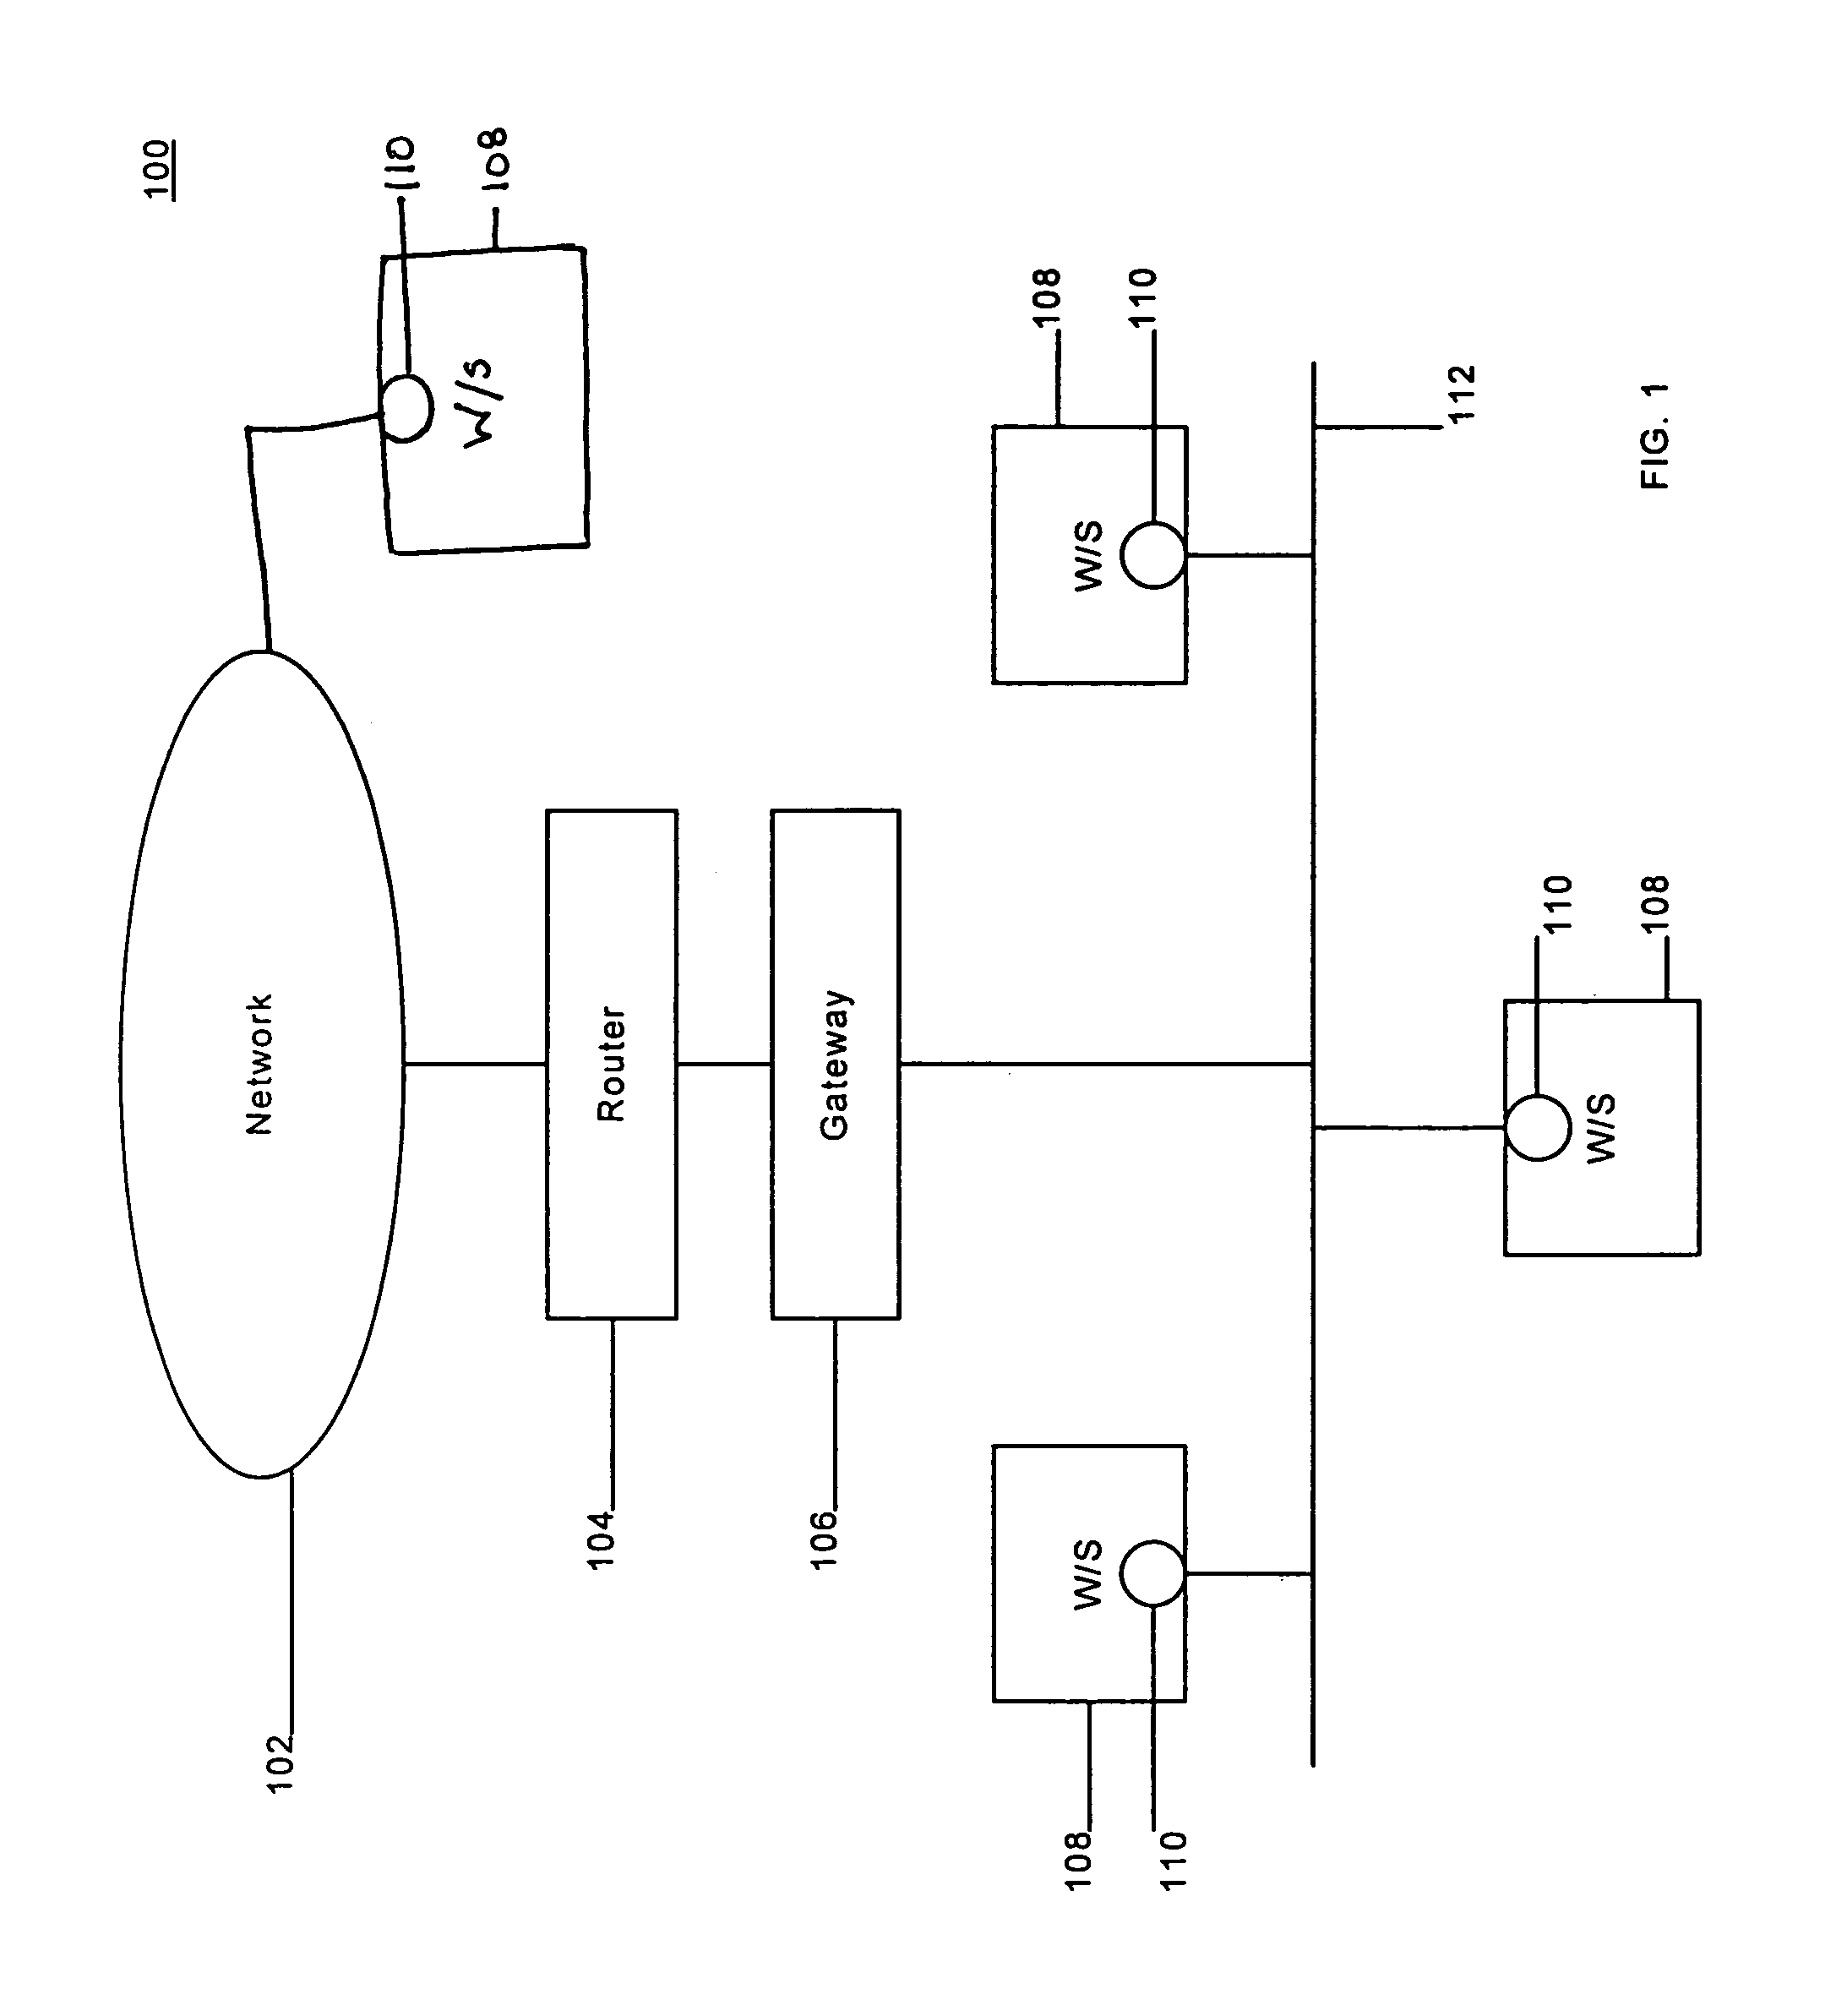 Method and apparatus for a distributed firewall